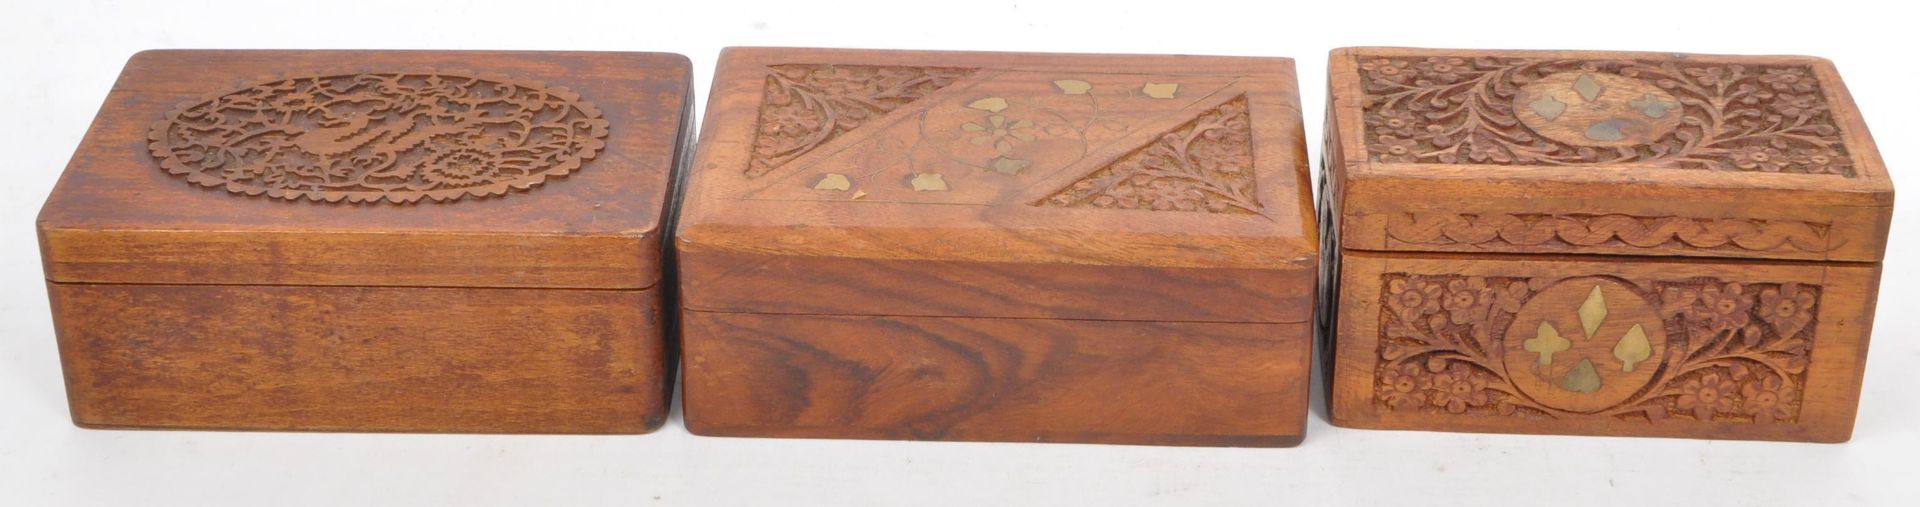 COLLECTION OF VINTAGE 20TH CENTURY CARVED & INLAID BOXES - Image 6 of 8